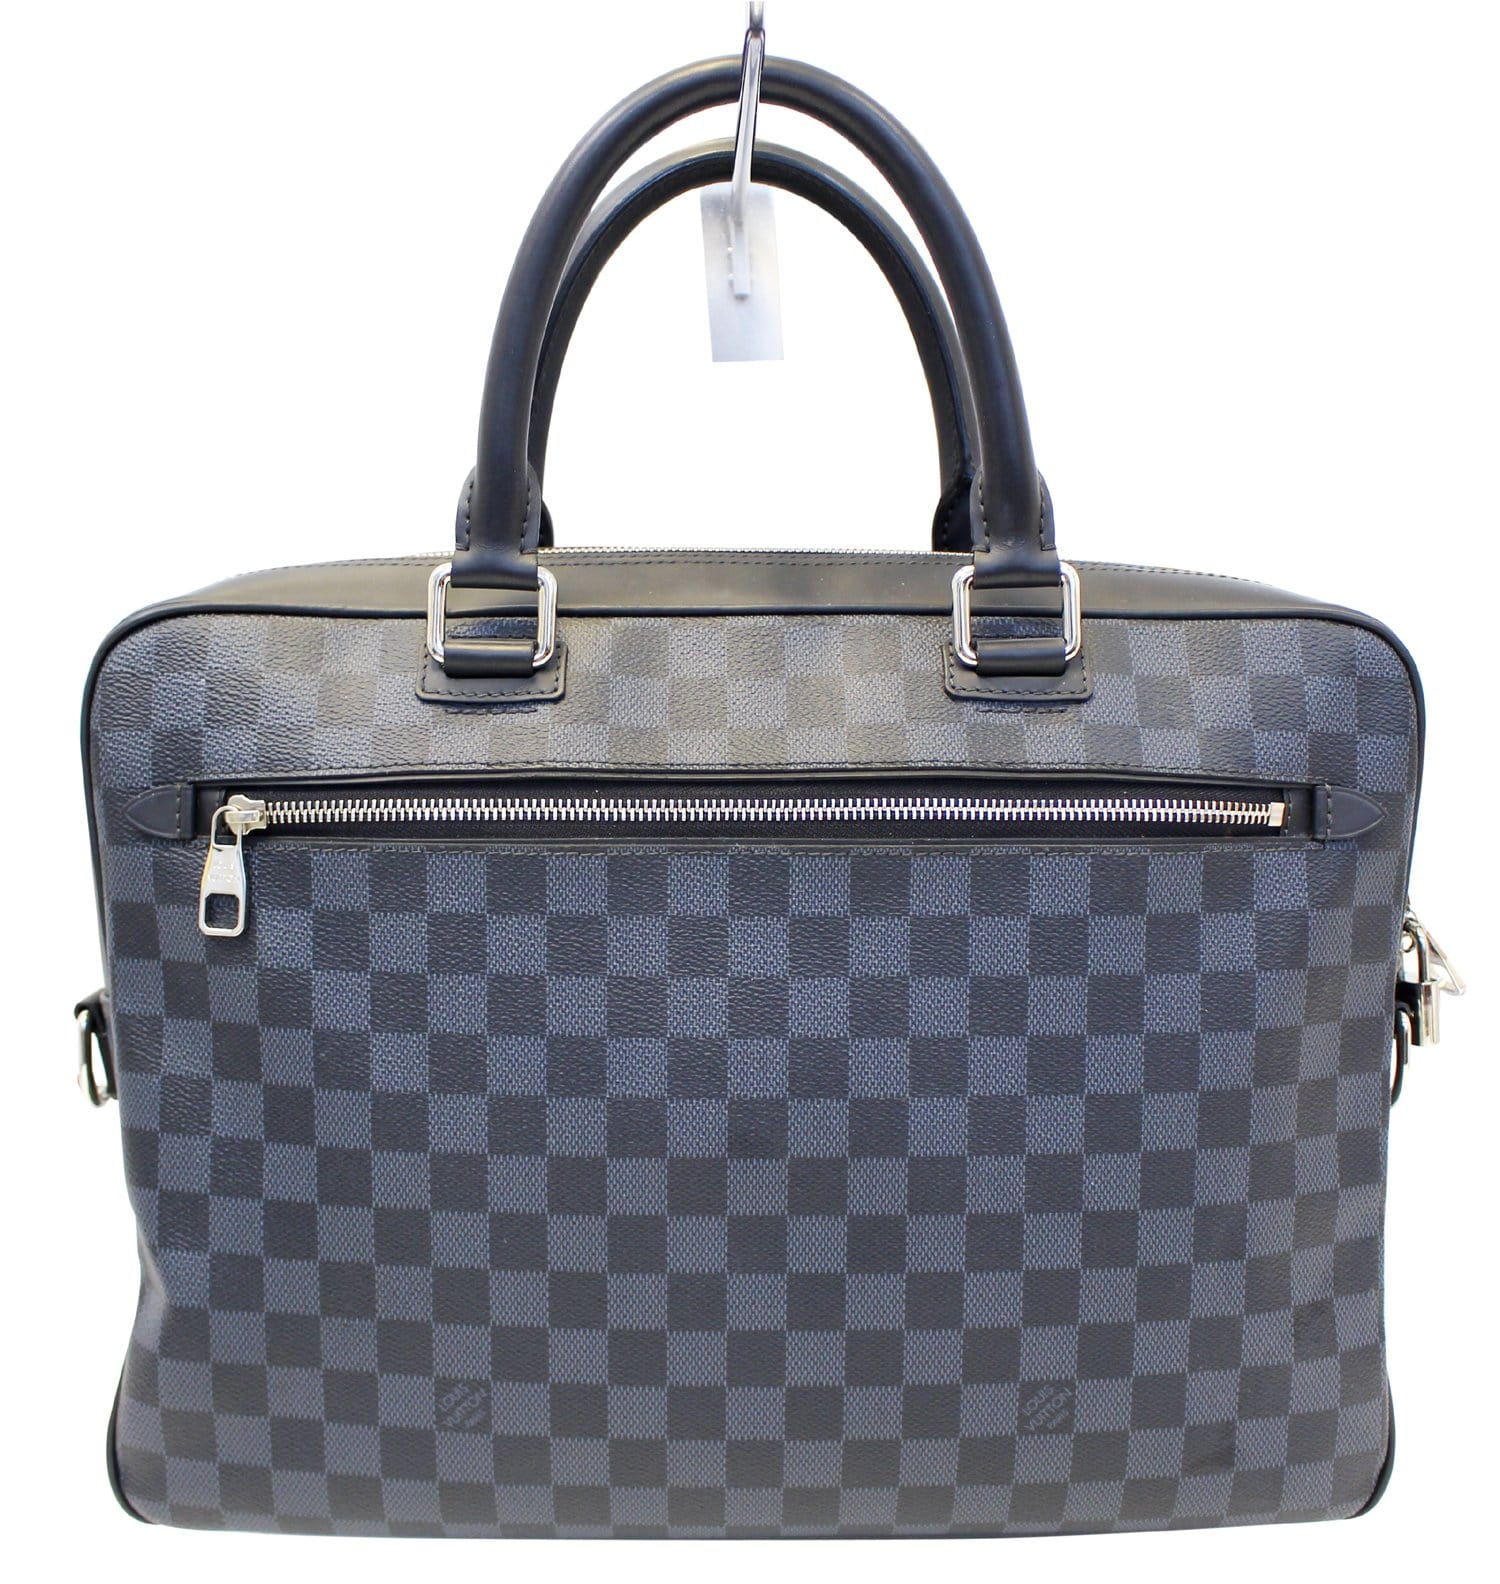 Genuine Leather Louis Vuitton Briefcase/Laptop Bag for Men in